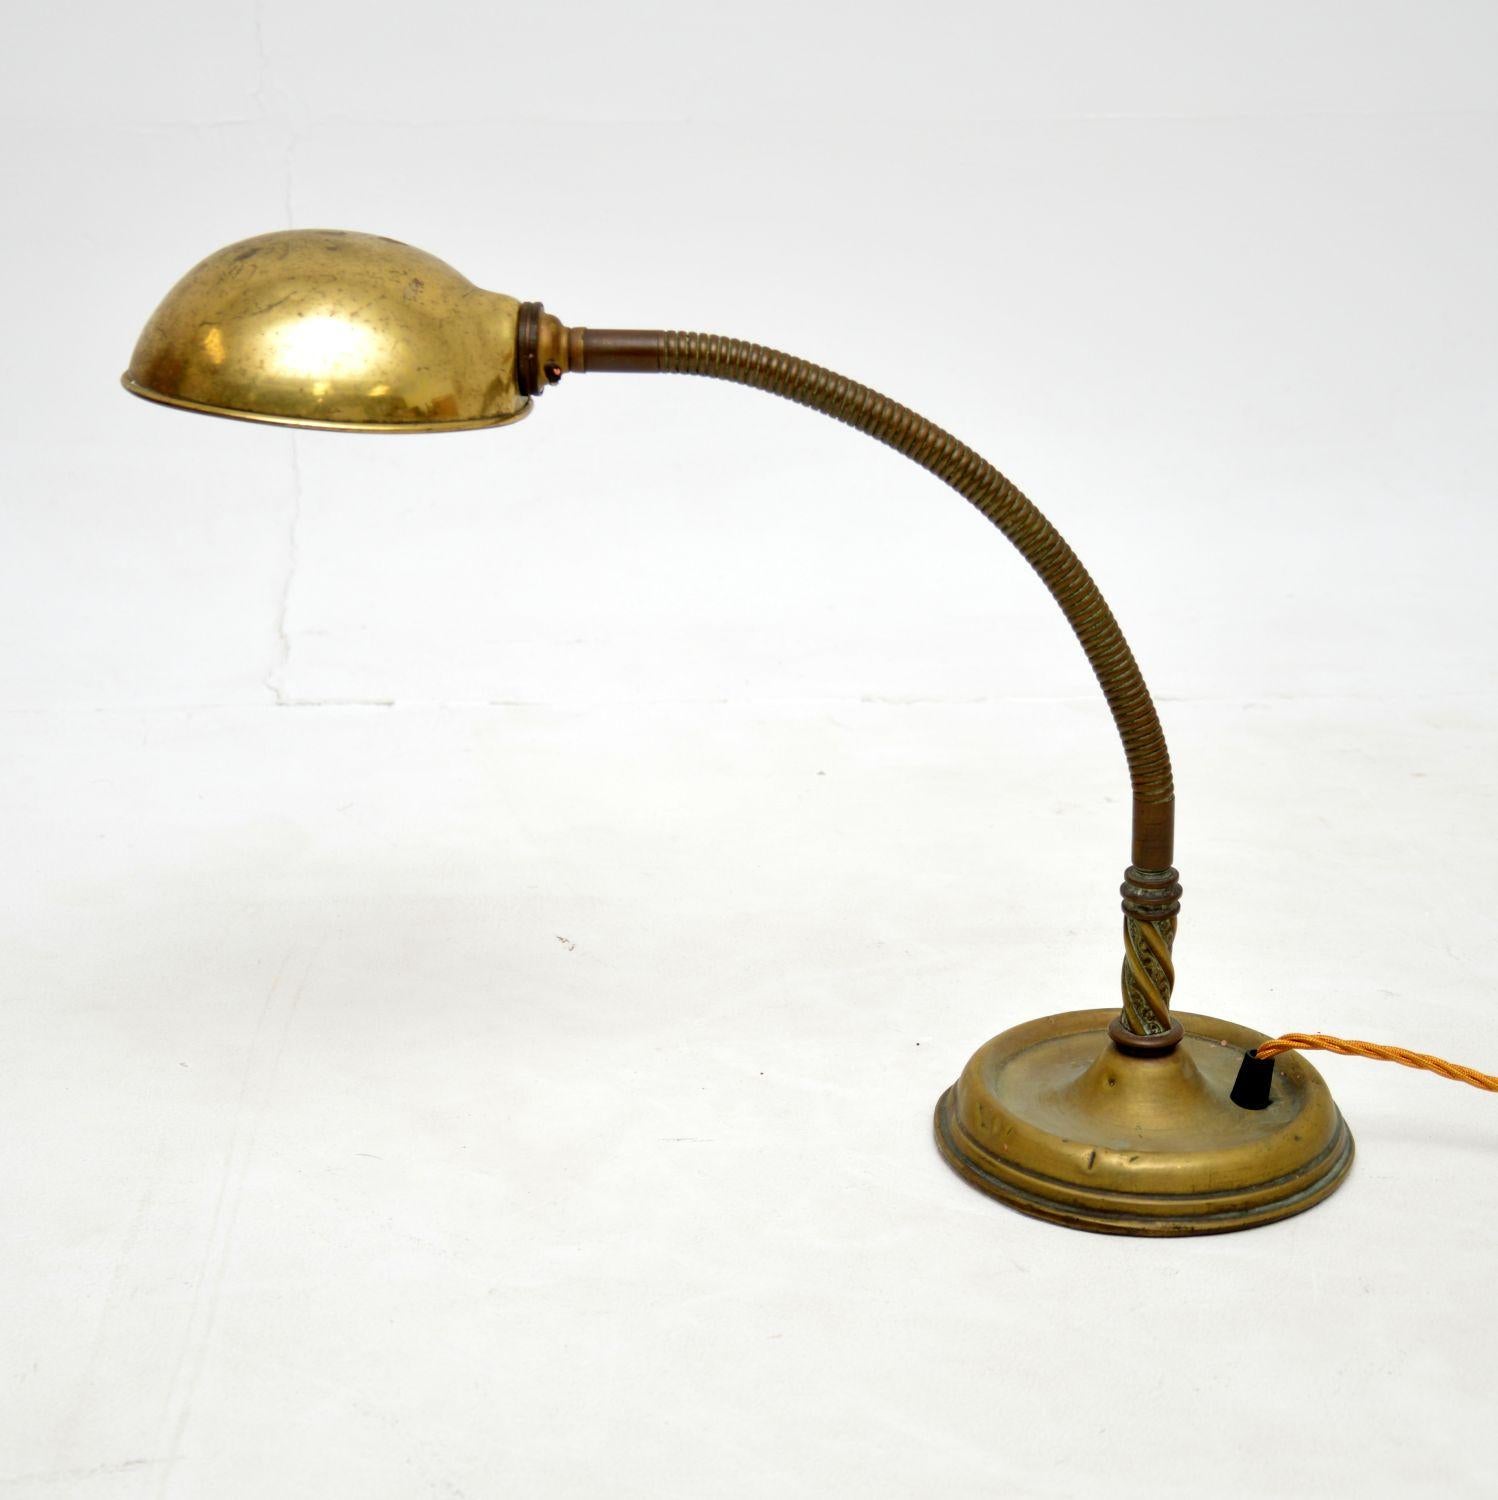 A charming antique desk lamp in solid brass, this was made in England and dates from the 1900-1920 period.

It is very well made, with an articulated goose neck that can be adjusted to various angles.

The brass has an absolutely gorgeous